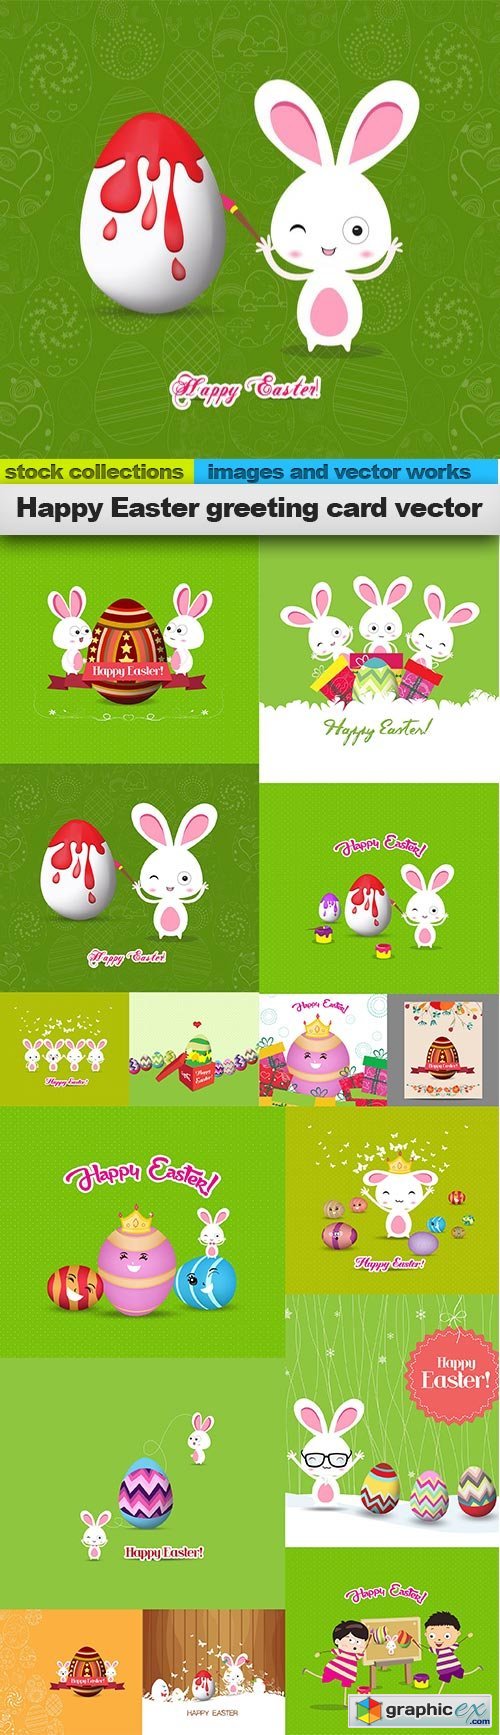 Happy Easter greeting card vector, 15 x EPS